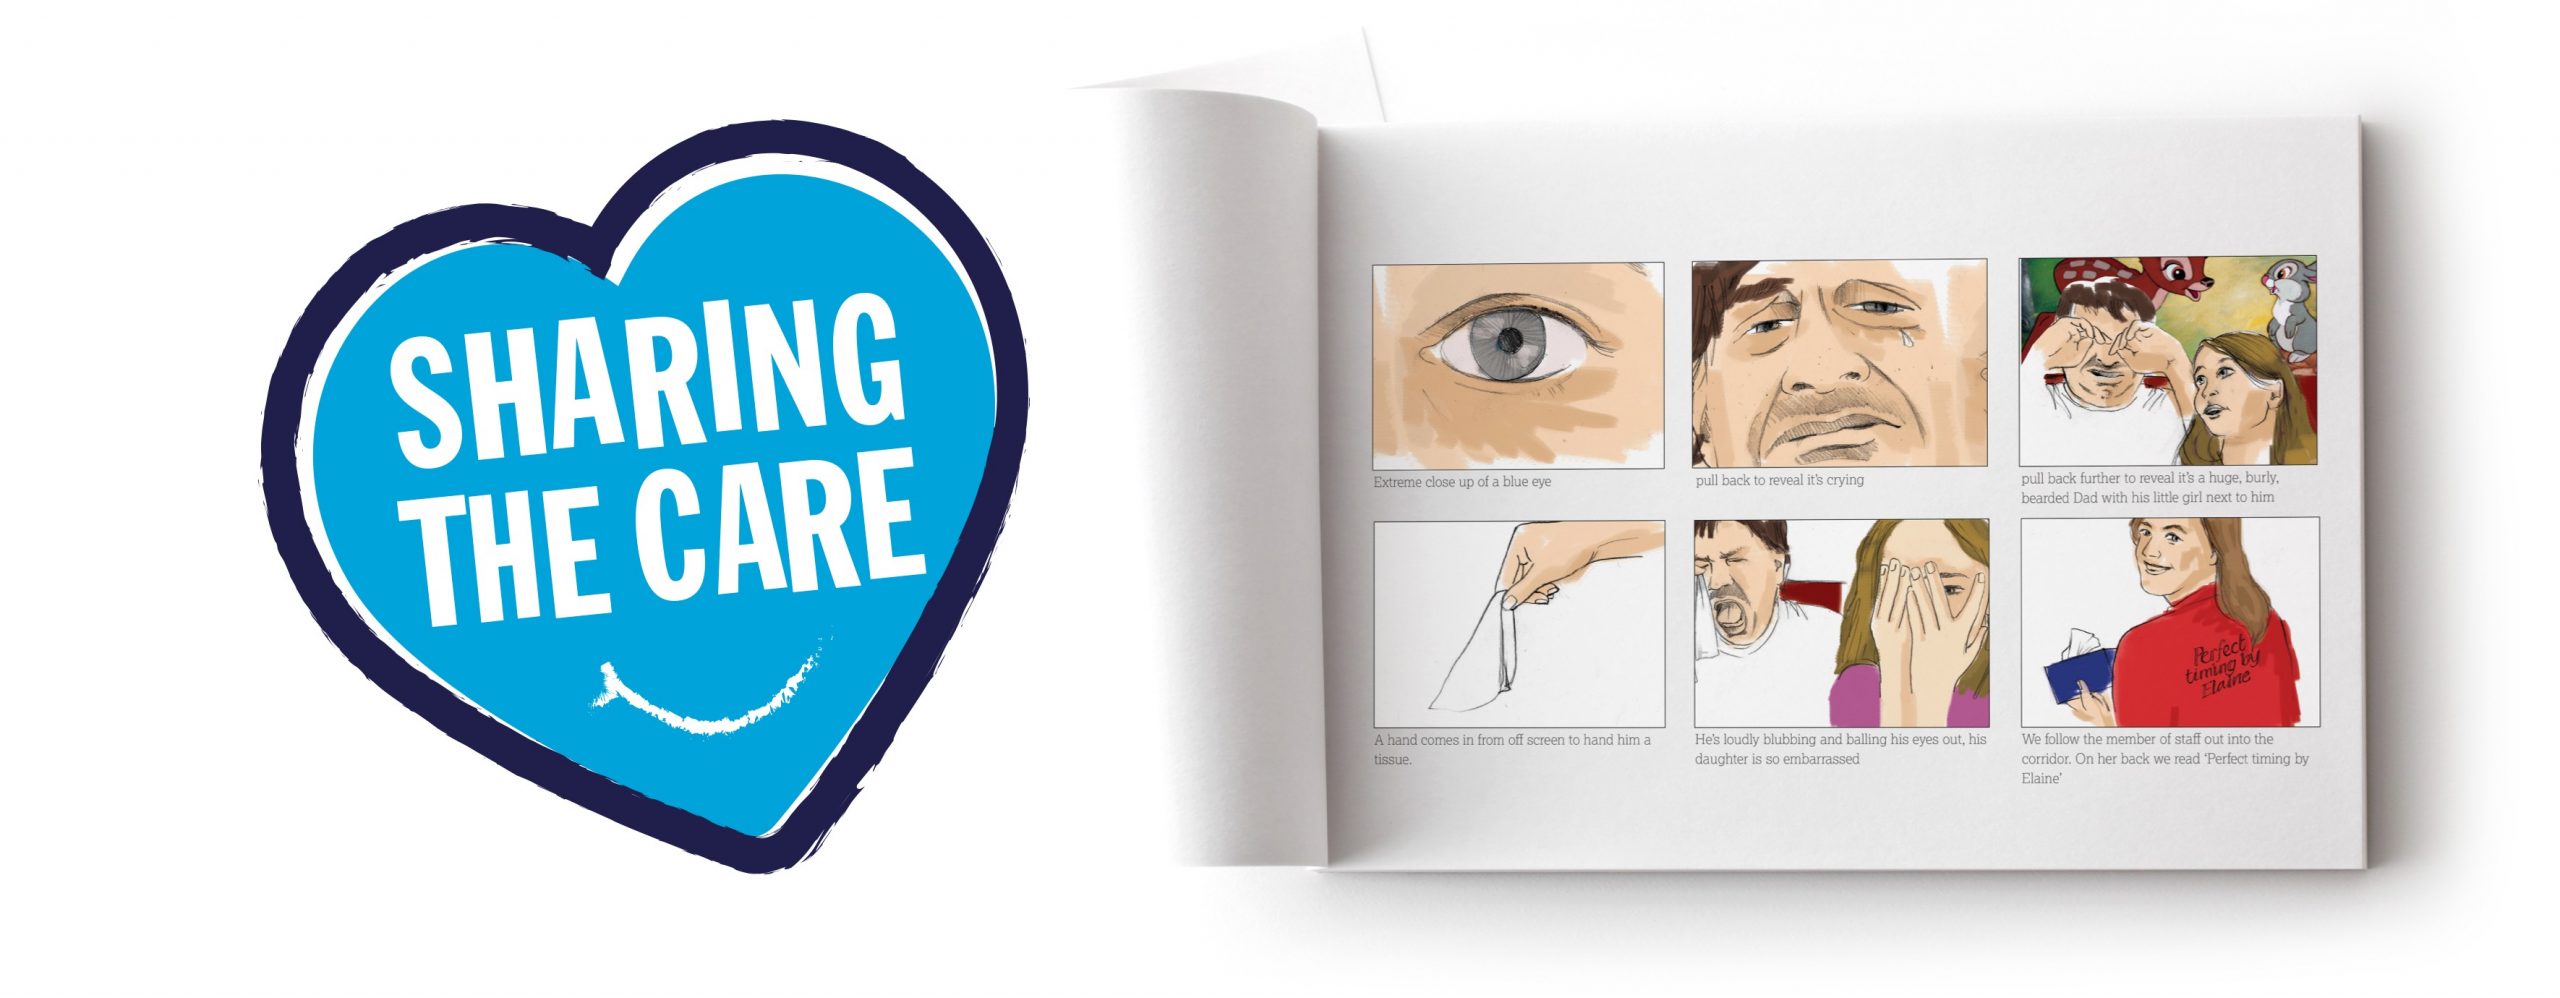 Stena Line graphic, Sharing the care,and storyboard of the brand film